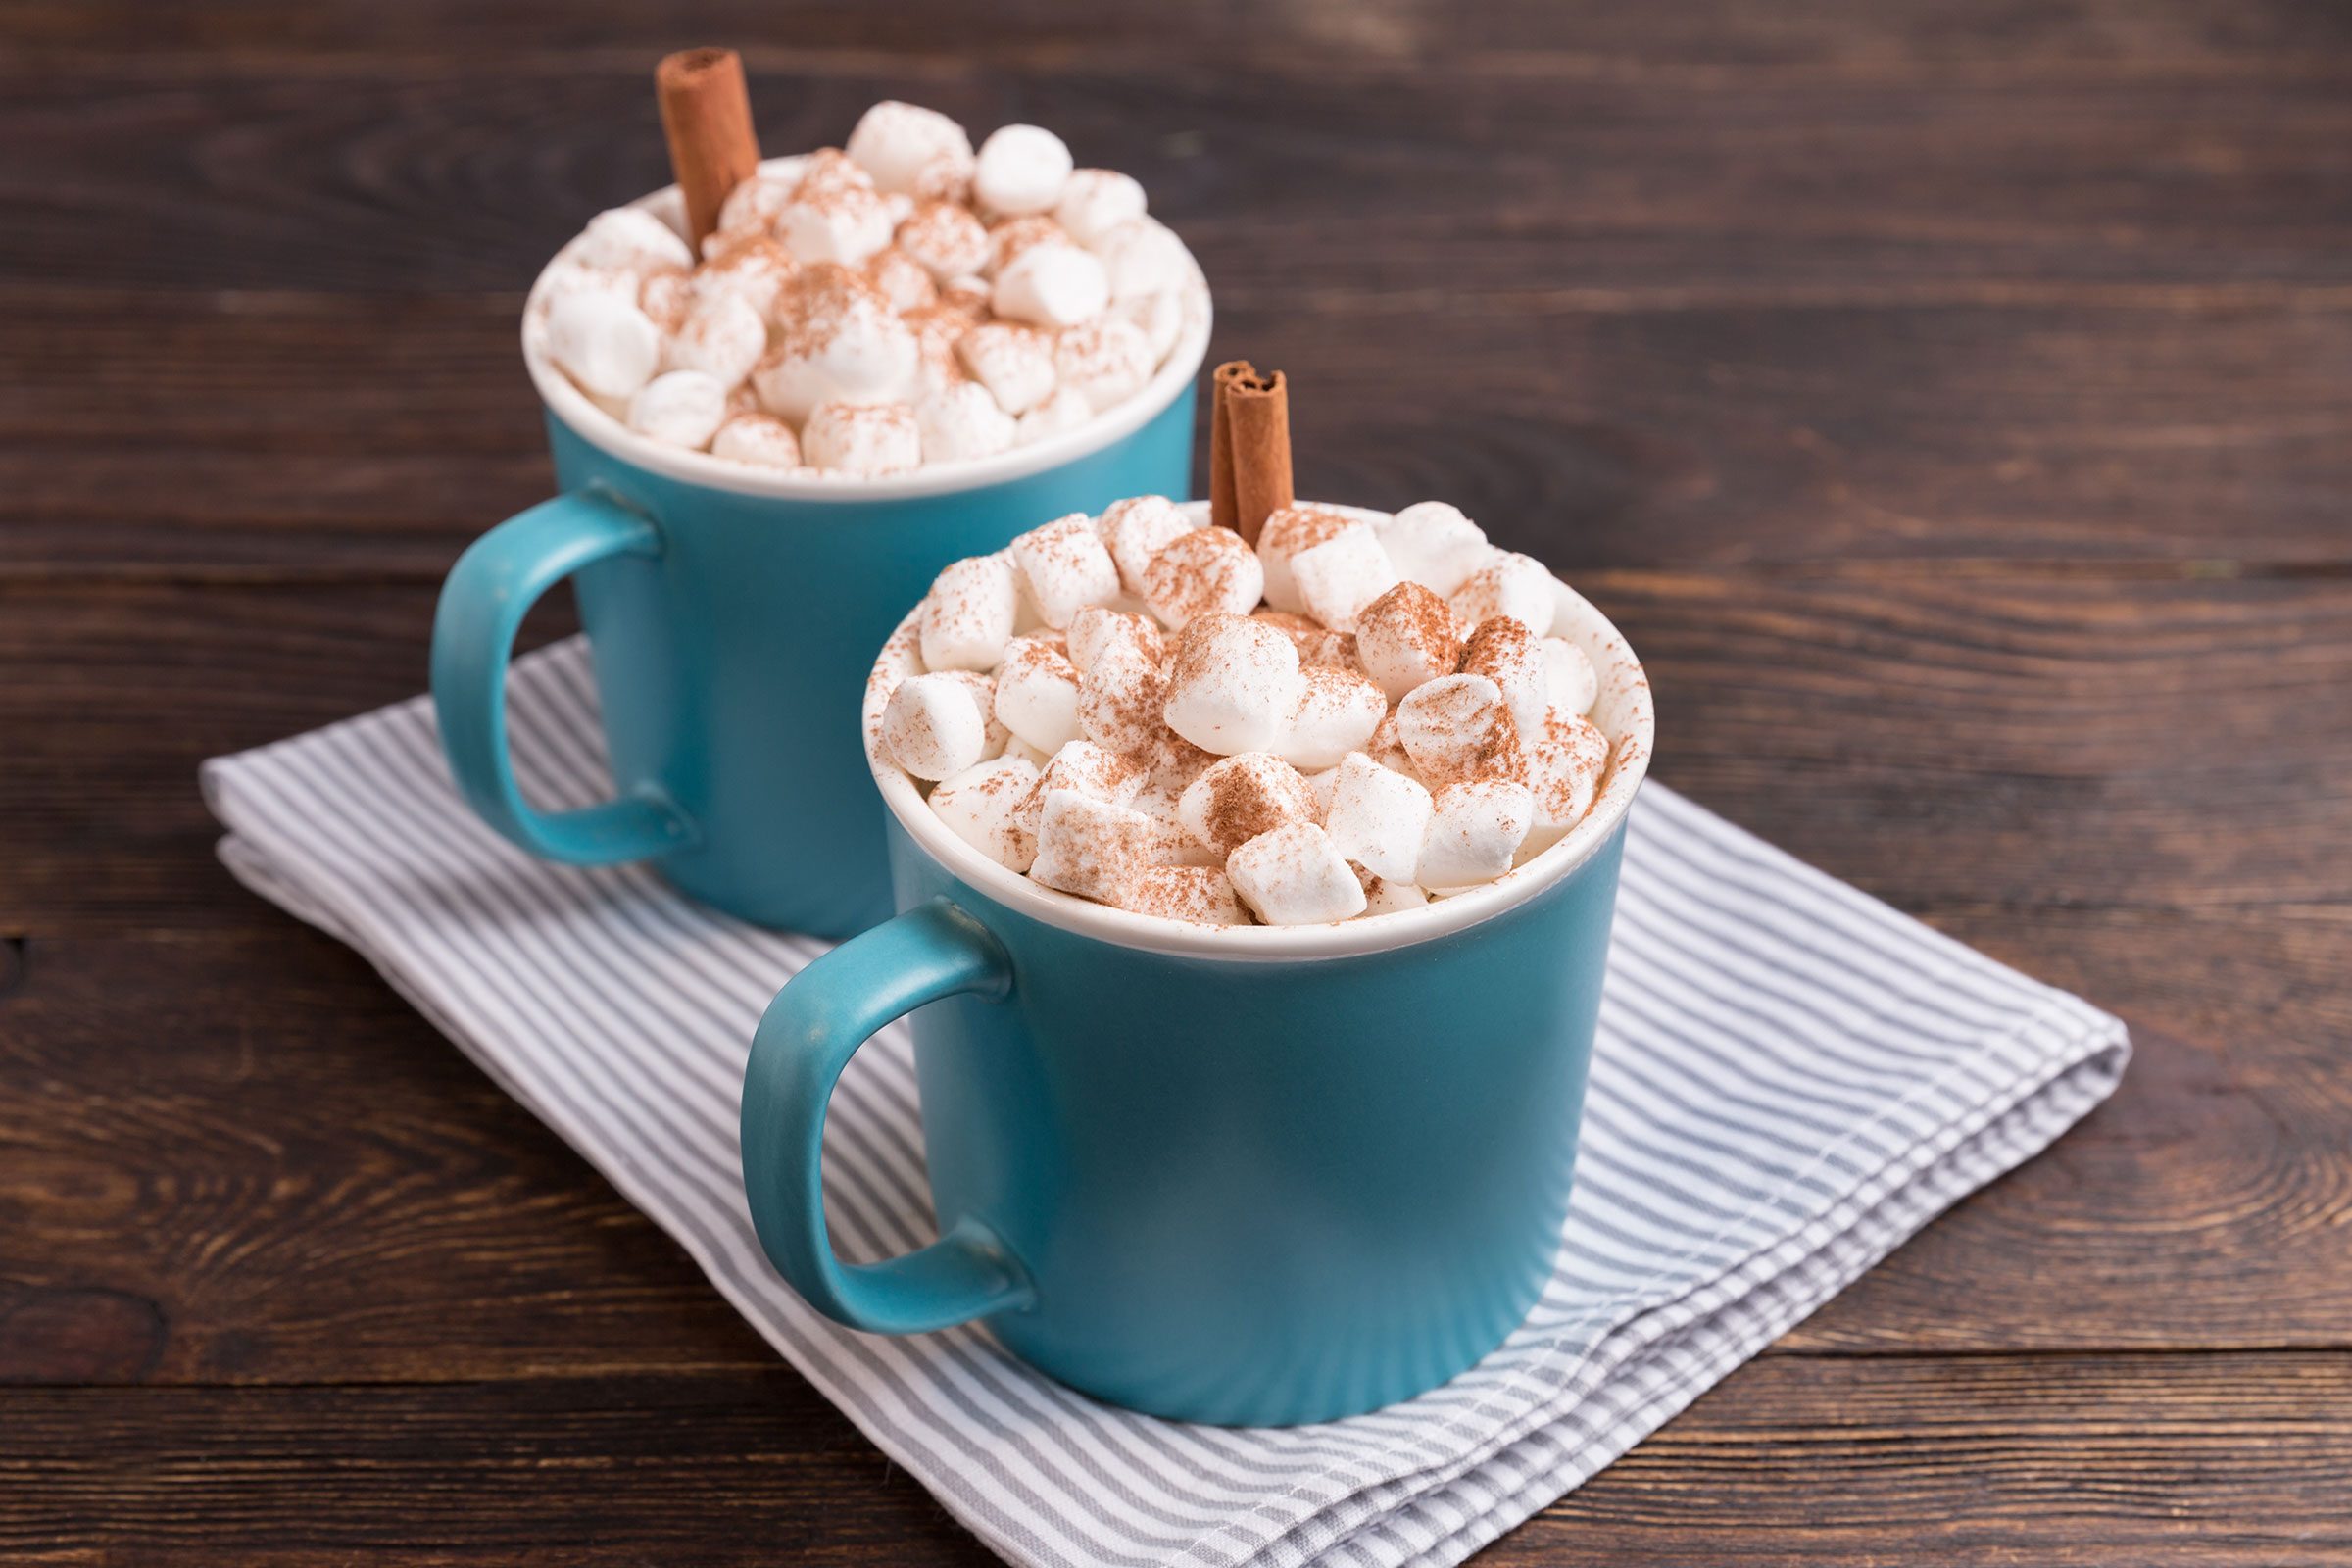 Hot Cocoa in blue mugs With Marshmallows On Brown Wooden Background.